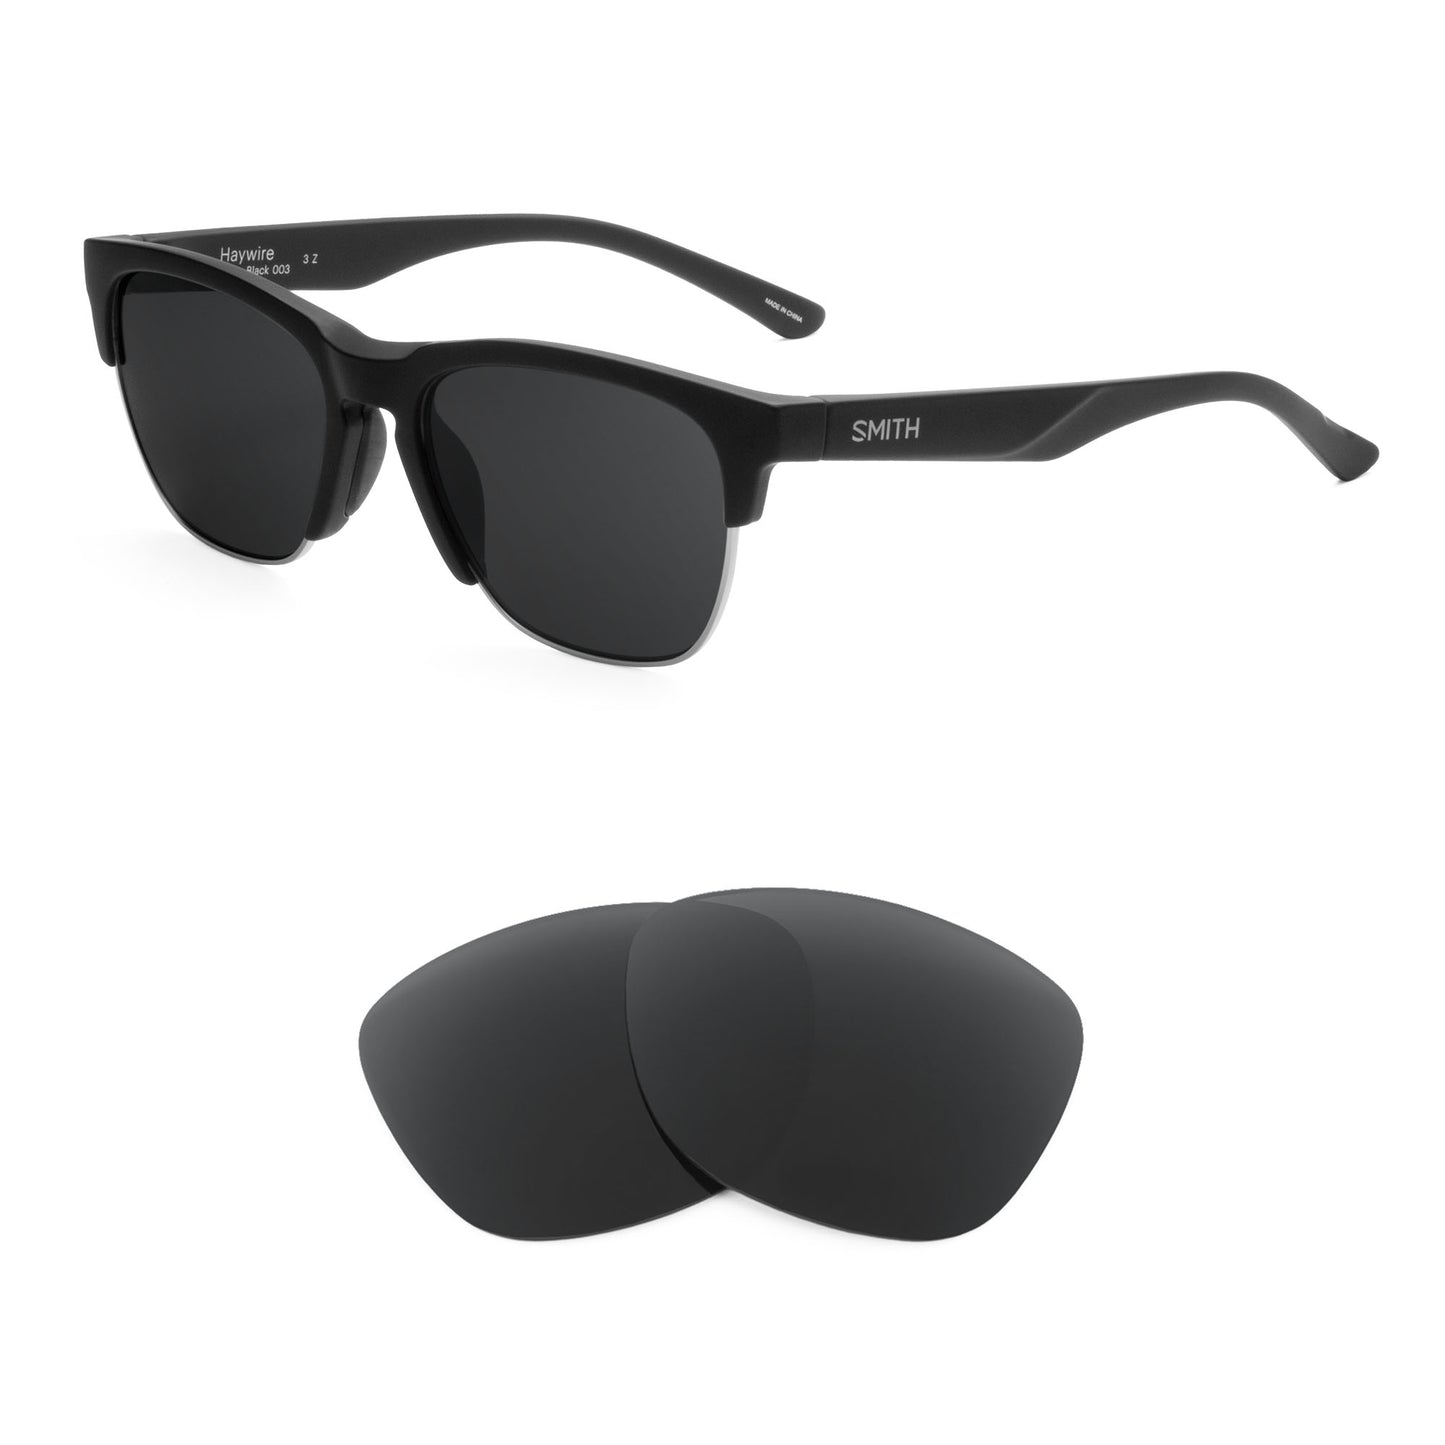 Smith Haywire sunglasses with replacement lenses